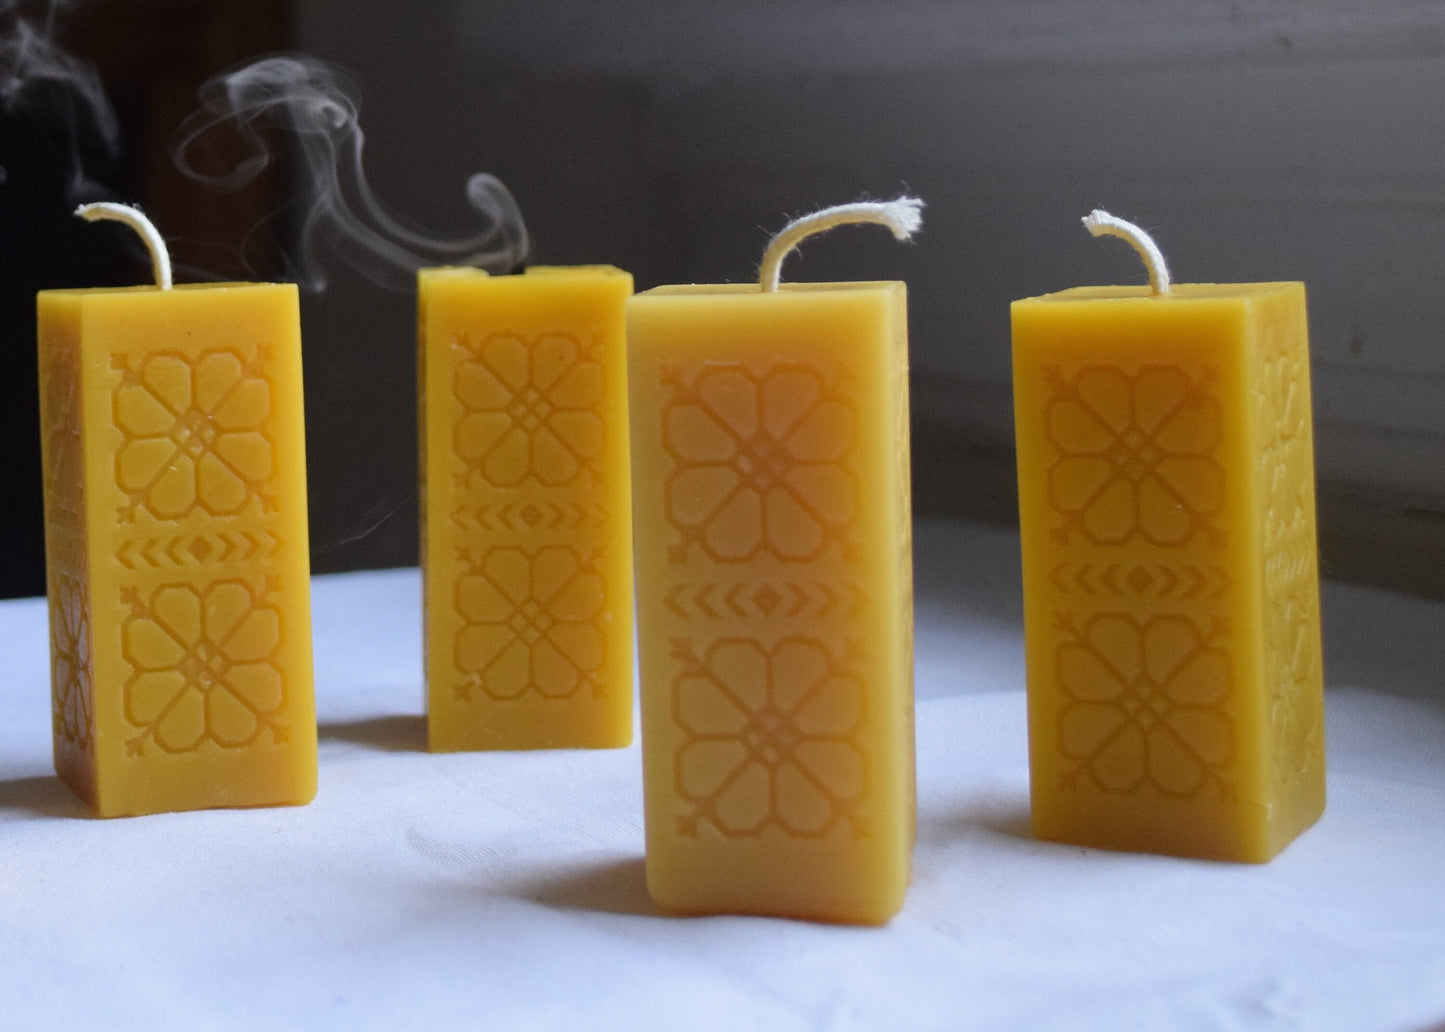 Square Sun Flower Pilllar -  Beeswax Candle, Candle // Beeswax Candle, Beeswax, Pillar Candle, Eco Friendly